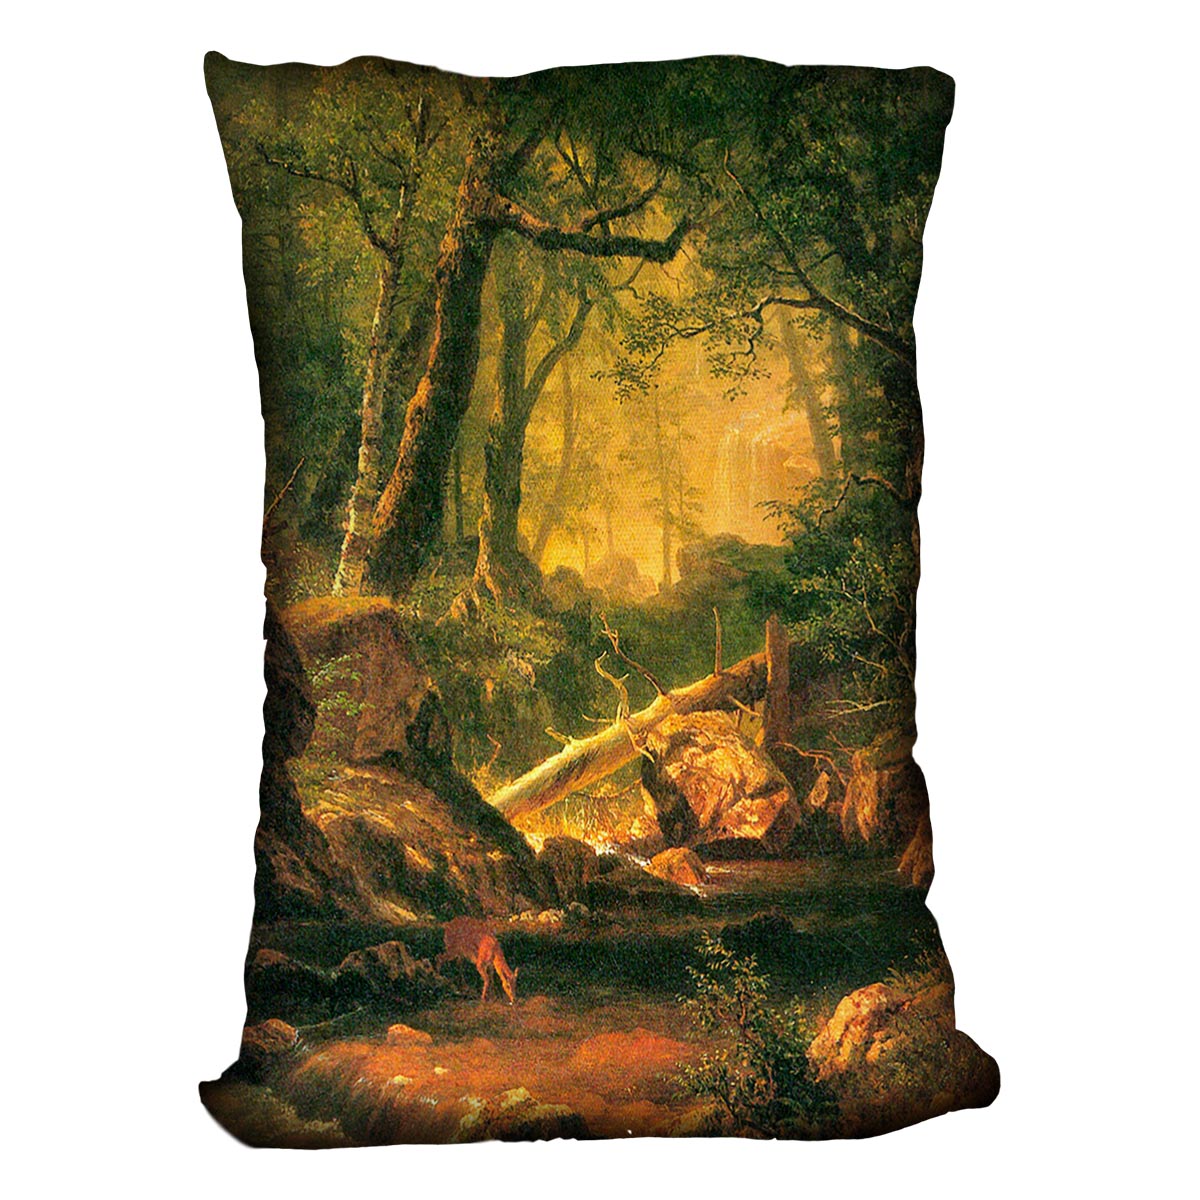 White Mountains New Hampshire 2 by Bierstadt Cushion - Canvas Art Rocks - 4